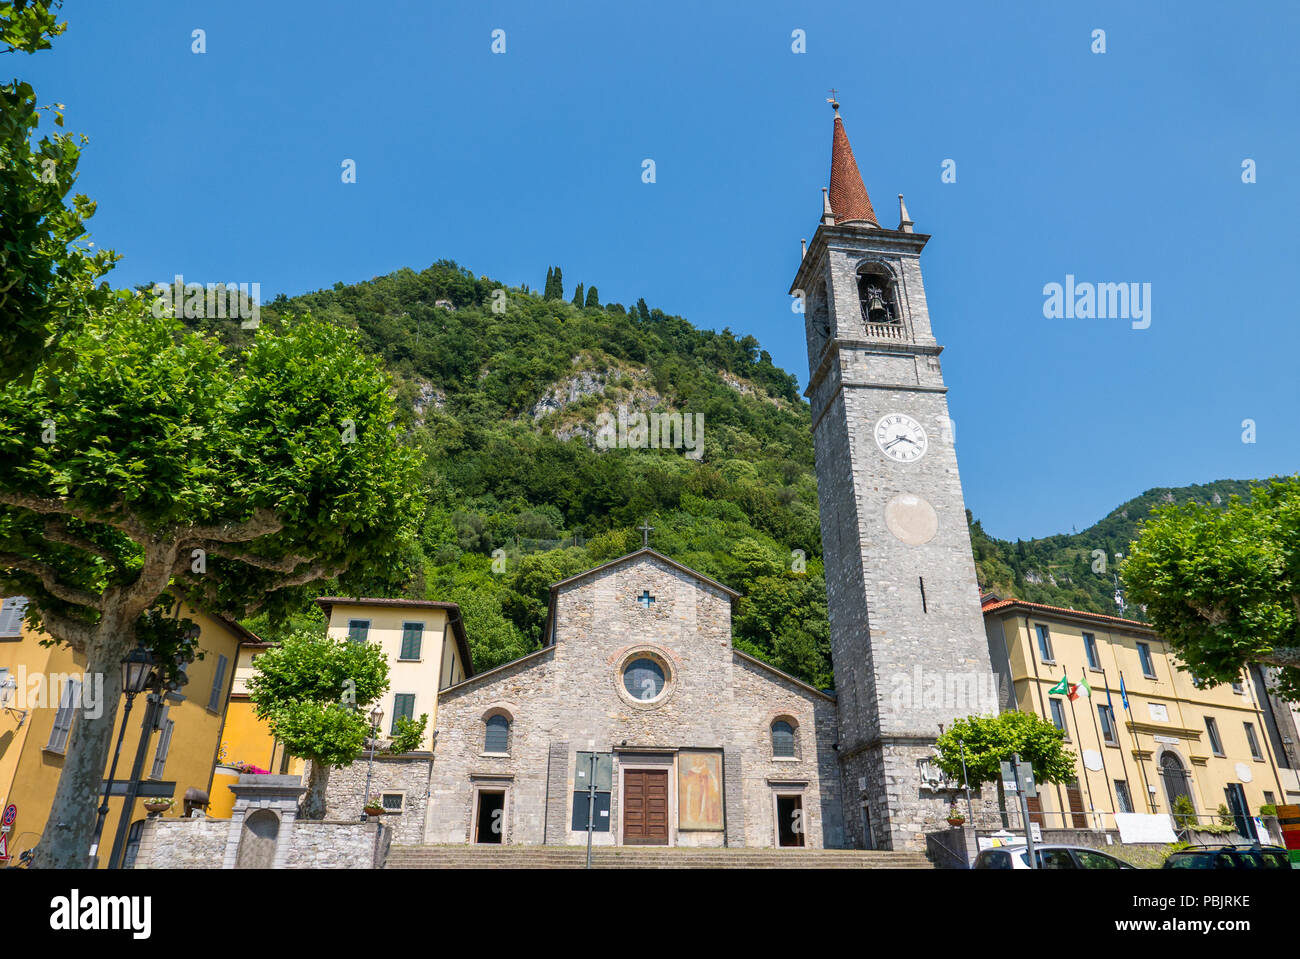 The parish church of San Giorgio dates back to the 13th century and is located in the square of the same name in the center of Varenna. Italy Stock Photo